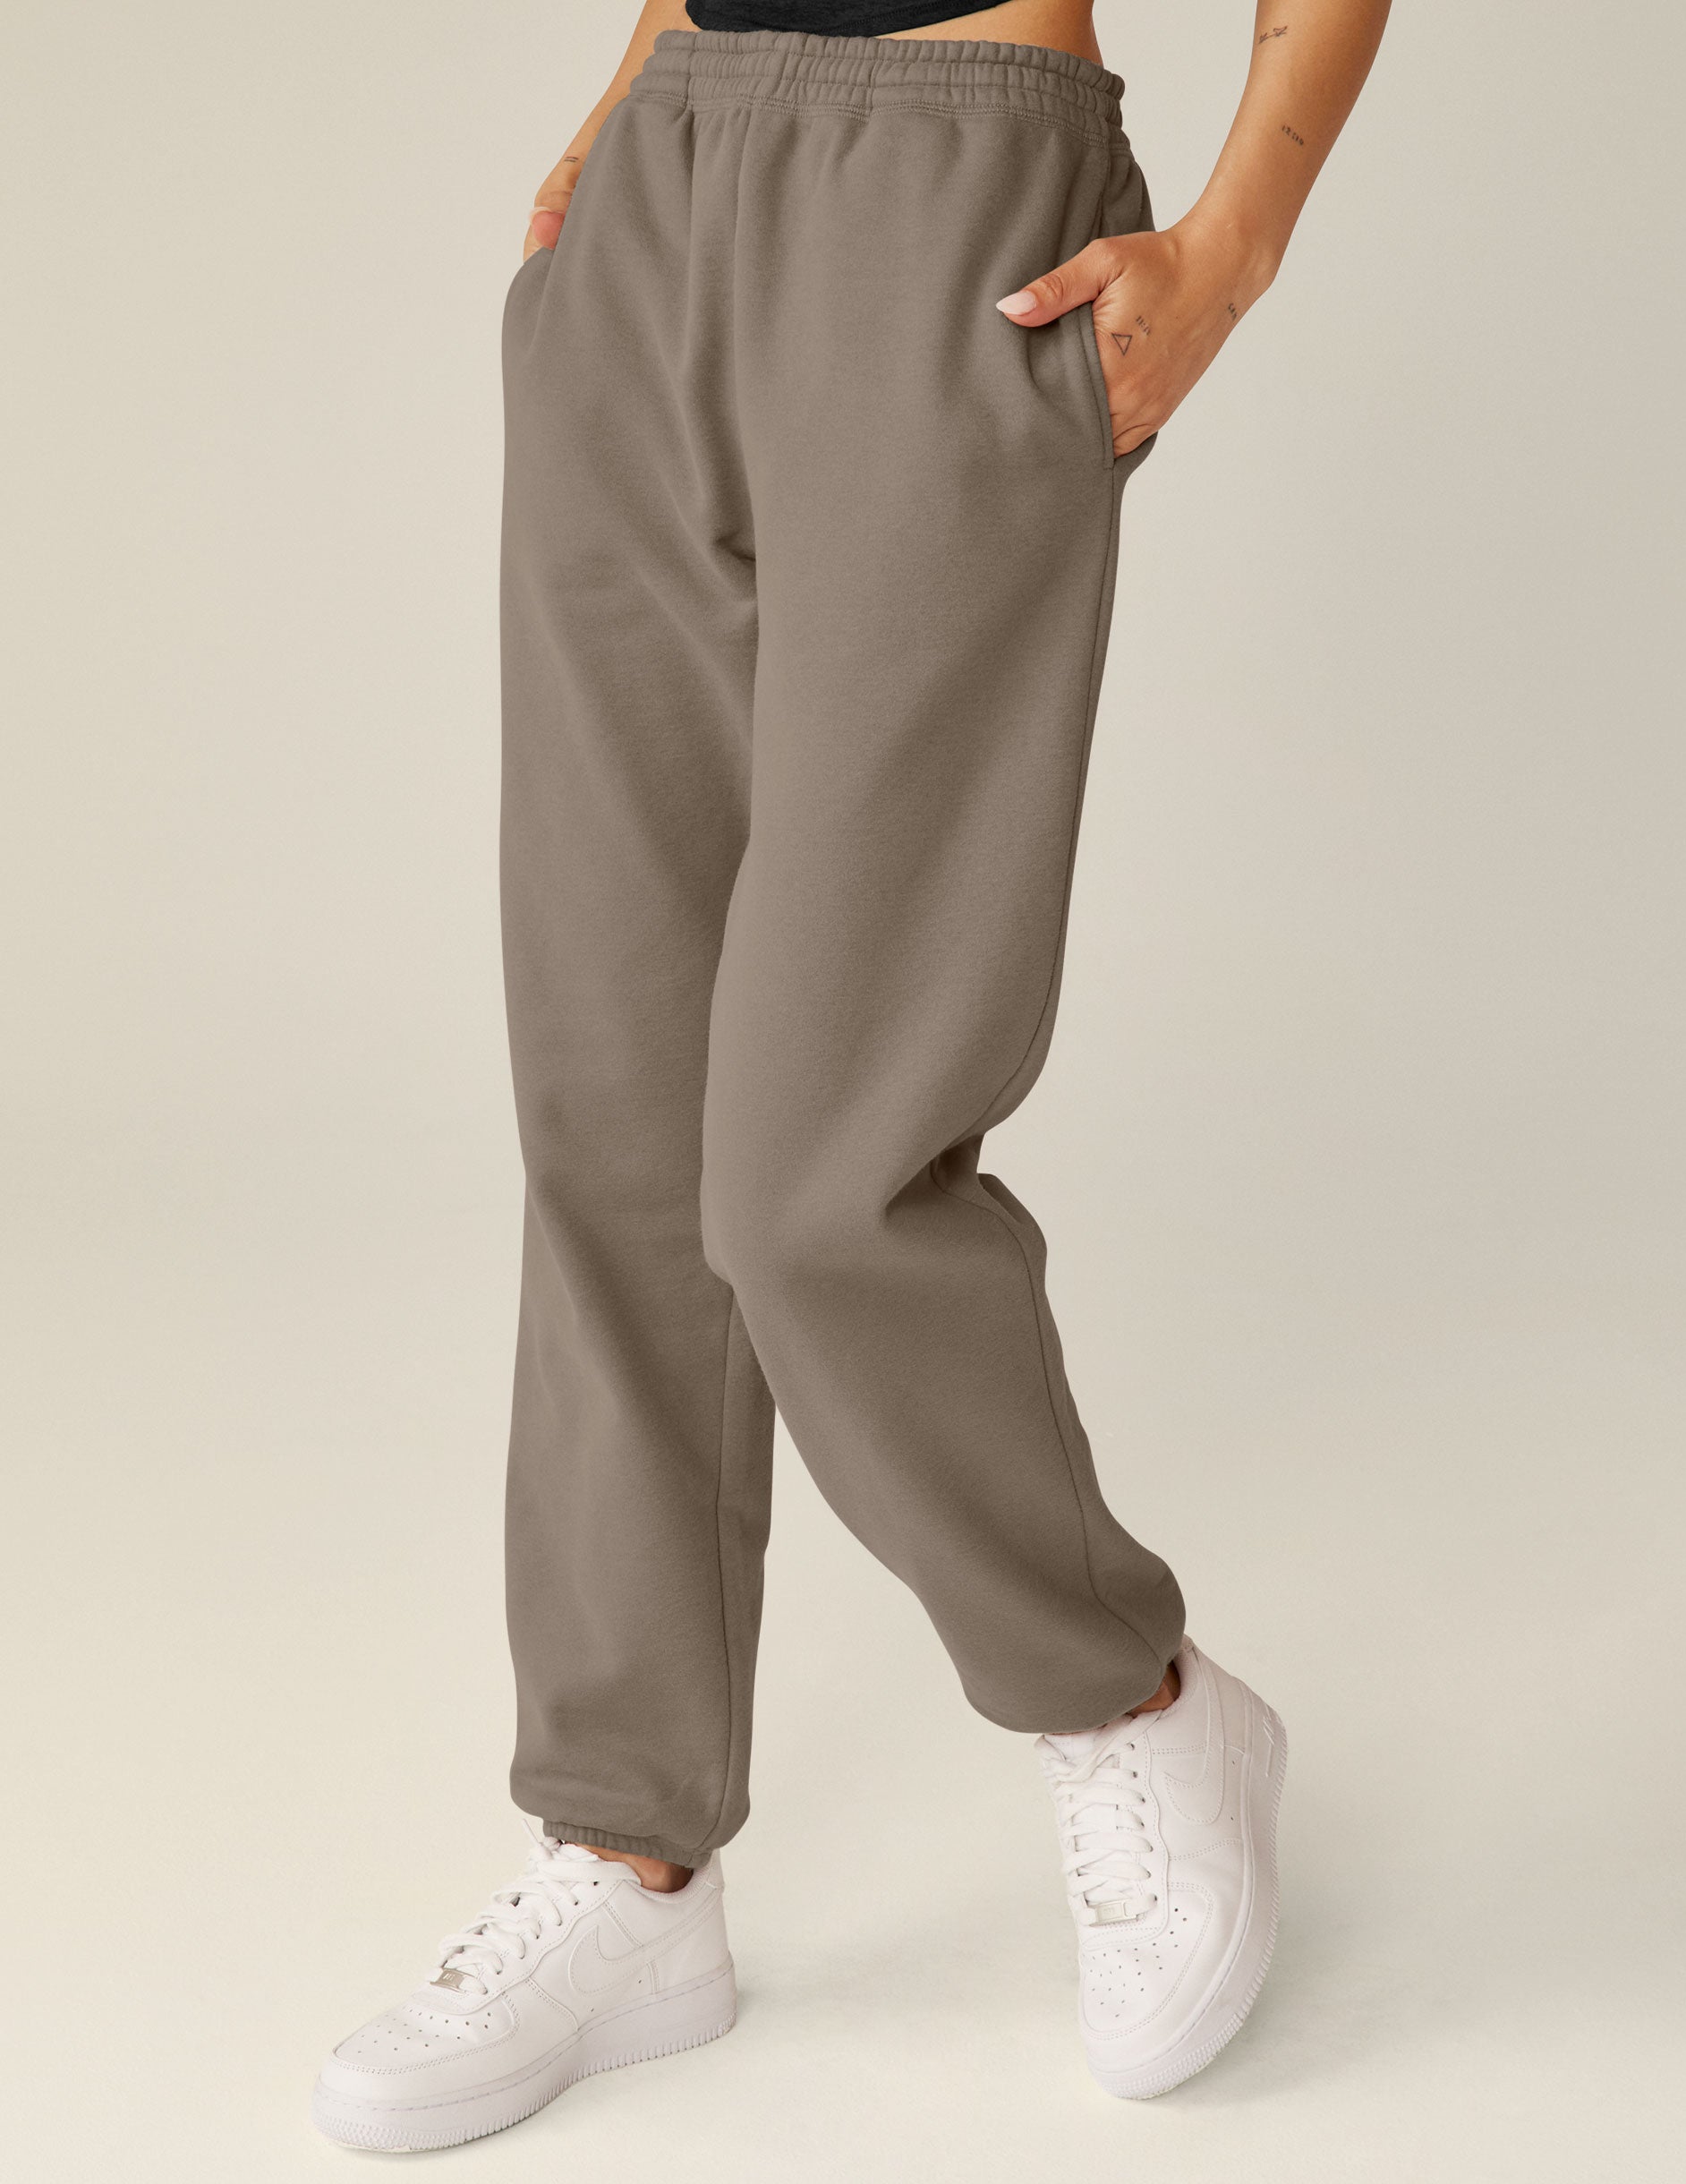 brown jogger pants with a drawstring on internal waistband